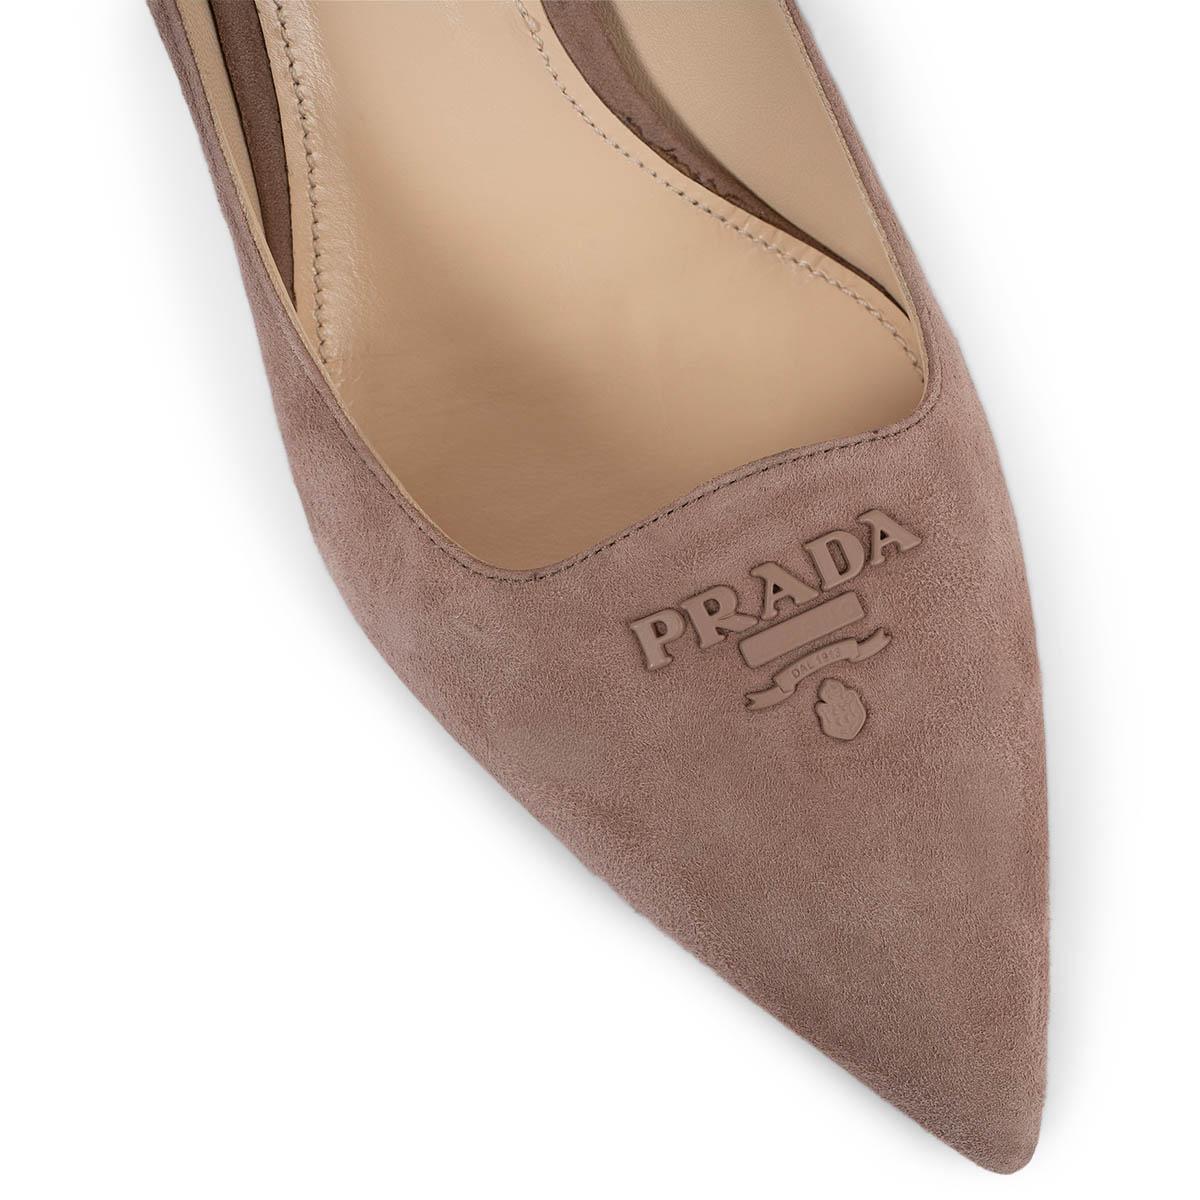 PRADA dusty rose suede LOGO POINTED TOE Pumps Shoes 39.5 For Sale 2